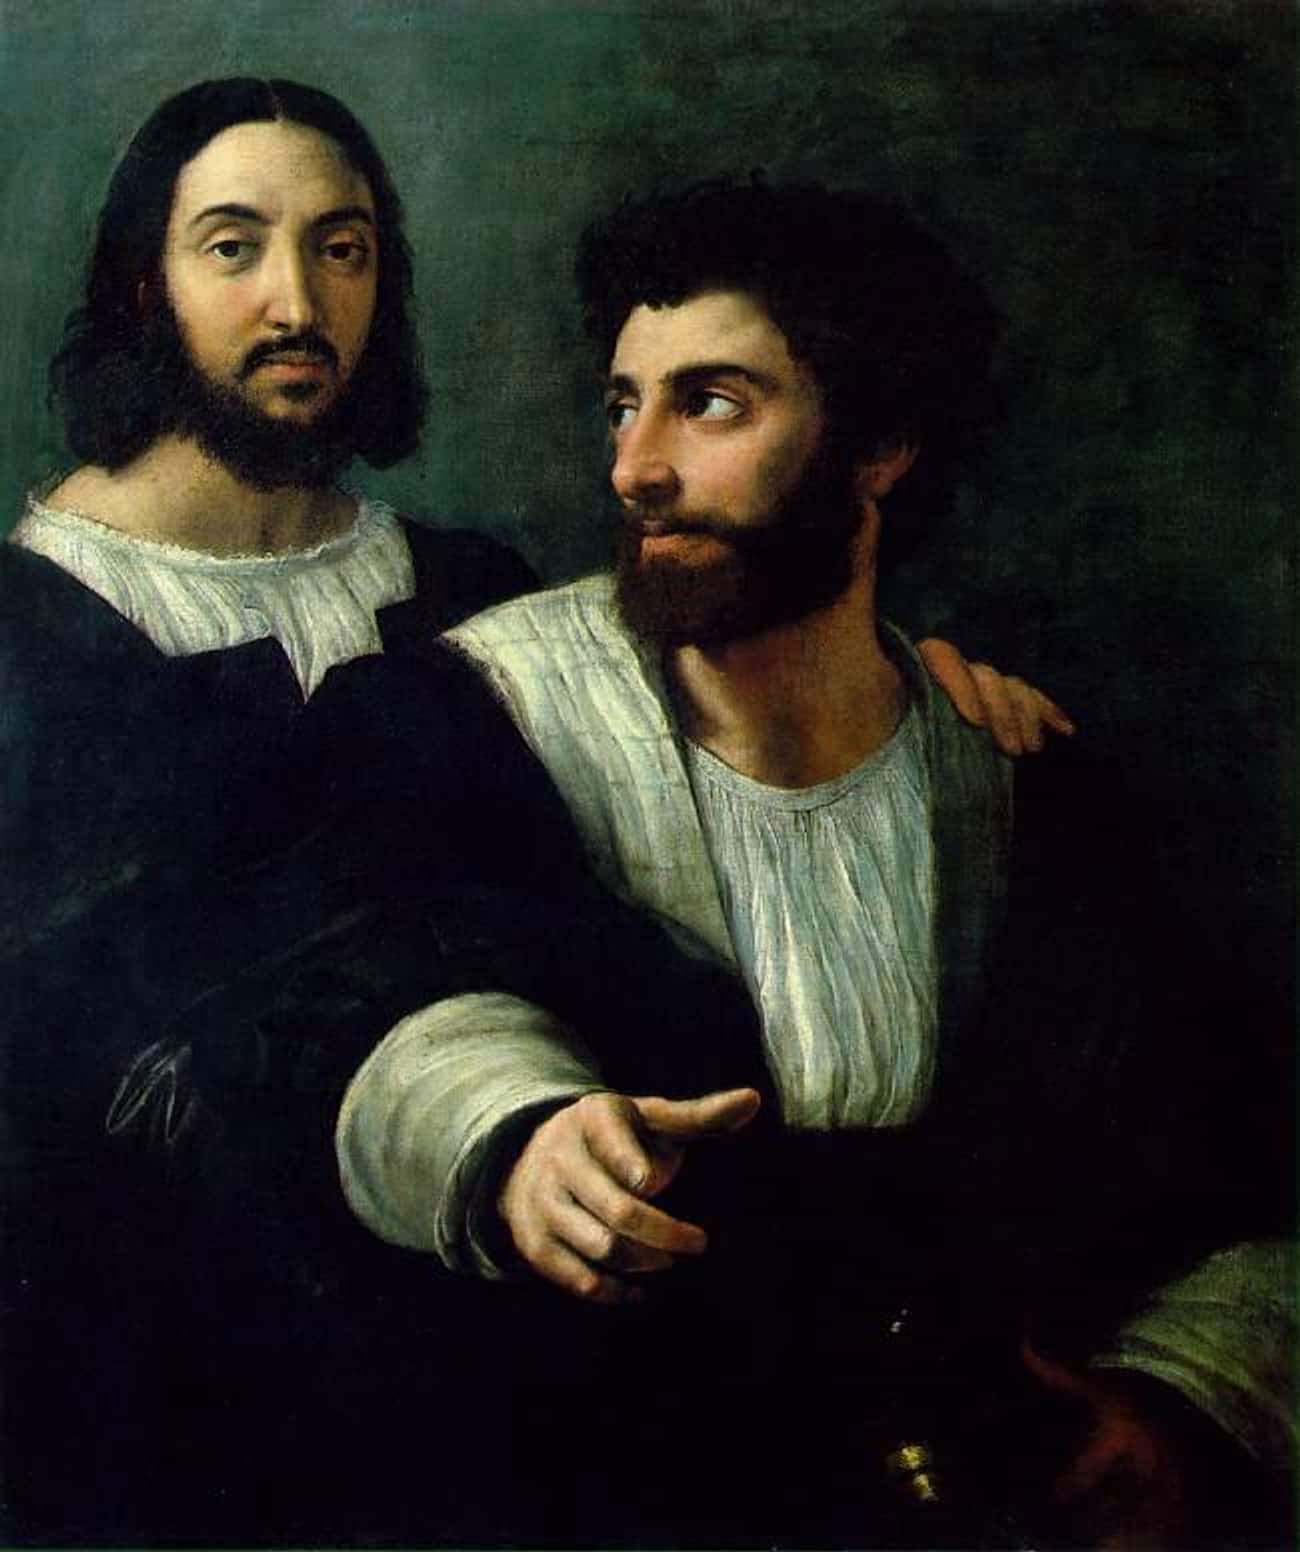 Self-portrait with a friend